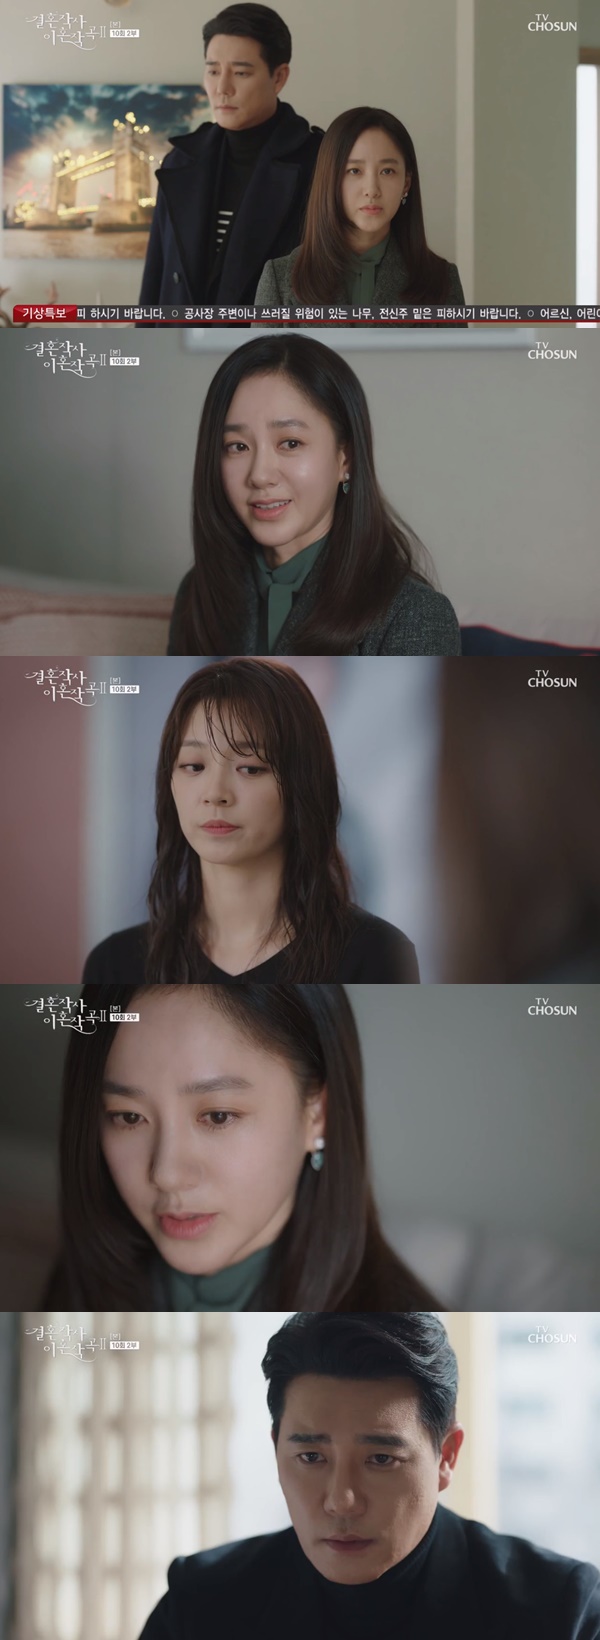 Marriage songwriter divorce composition 2 Park Joo-Mi declared divorce to Shin Yusin.On Saturday, TV Chosun Saturday Drama Marriage Writing Divorce Composition 2 (hereinafter referred to as Girl Song 2) depicted Safi-Young (Park Joo-Mi) and Lee Tae-gon who visit Amys house.On this day, Safi Young said, I am Shin Yu-shins wife. In a while, with my husband. I am ready to hear my answer. I am hours. Amy replied, I love you.Safiyoung said, Shin Yu-shin is right because he can not deny it. He asked Amy about her age, the time she met Shin Yu-shin, and the gift she received.Amy replied calmly, and Safiyoung said, Hes quite sweet. Ive been there, so I know. Thanks. Ill get you the papers.Talk to them. You should plan your life. 